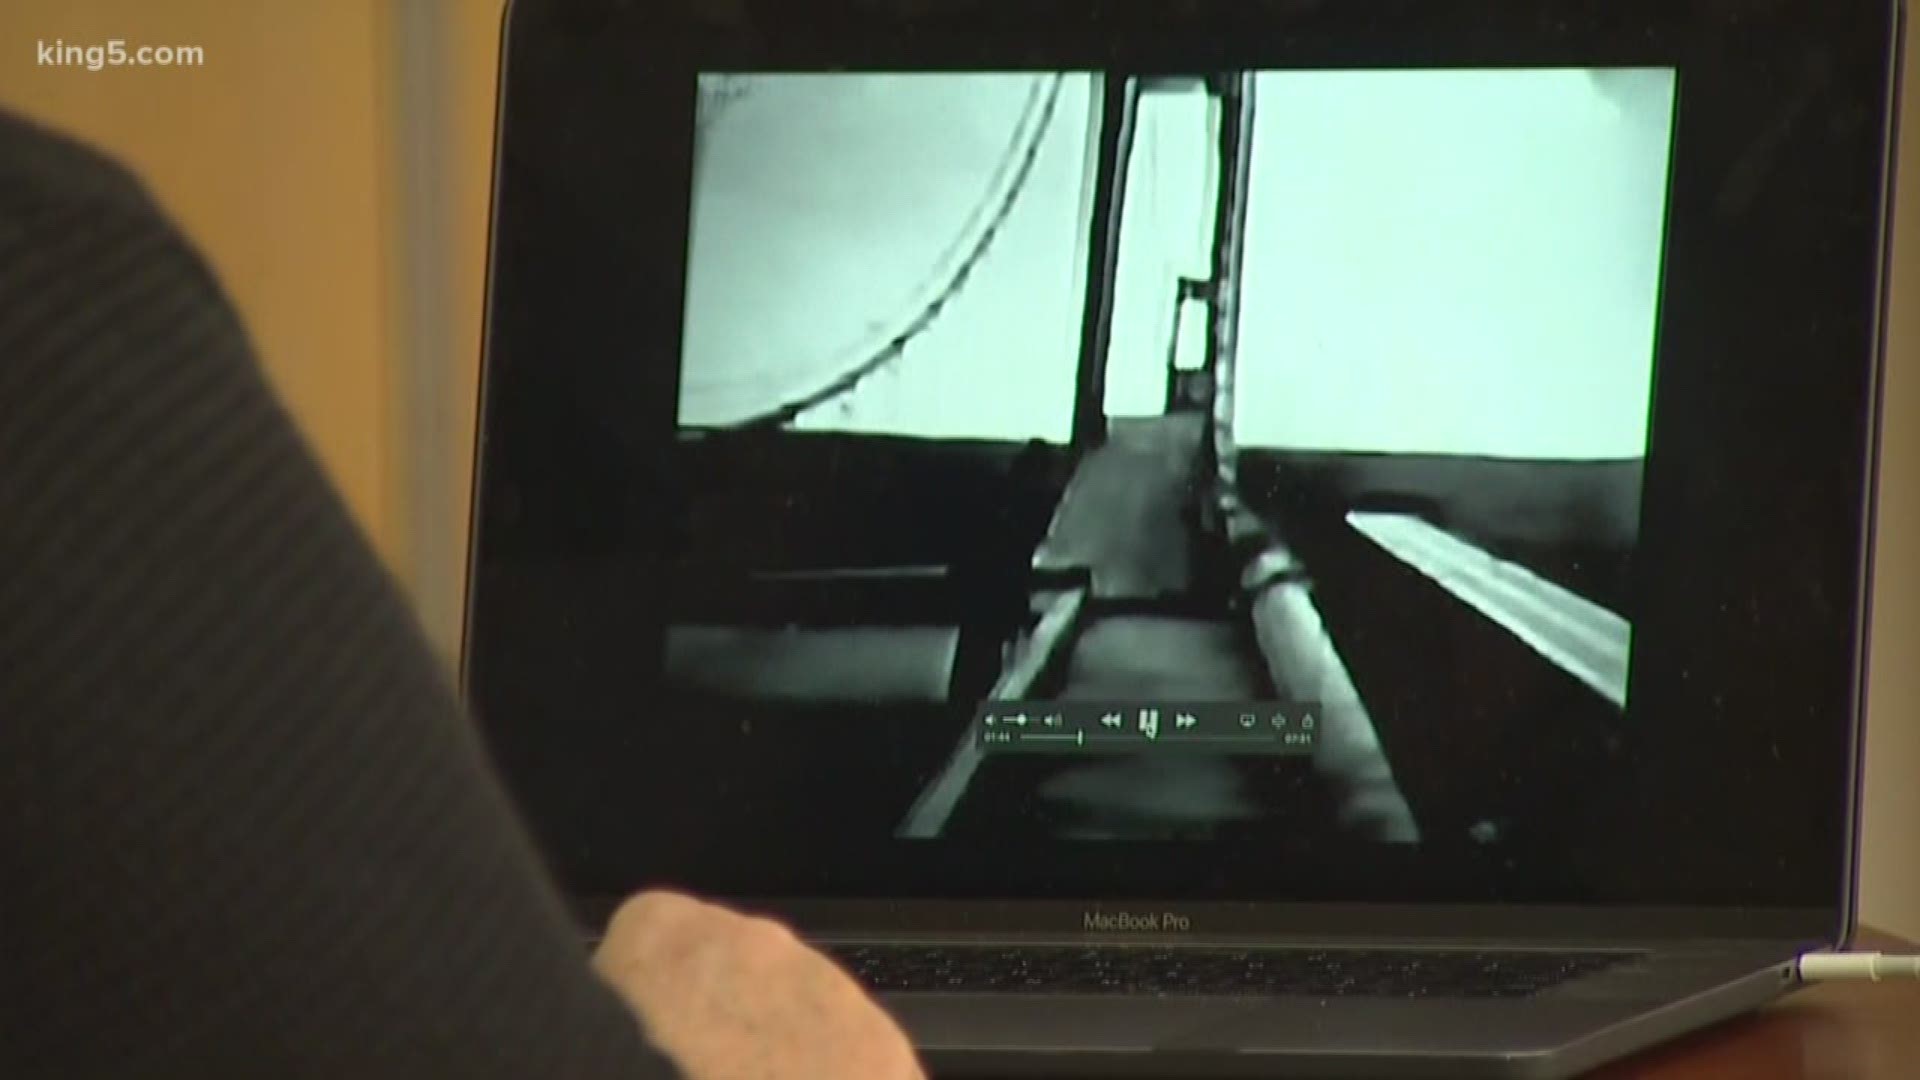 The Tacoma Narrows Bridge collapse is an iconic part of the northwest history. And today, the rebuilt bridge is a key part of reaching communities out on the peninsula, which is why the Harbor History Museum was so excited to find video shot of the 1940 collapse from the other side of the sound, for the first time ever.